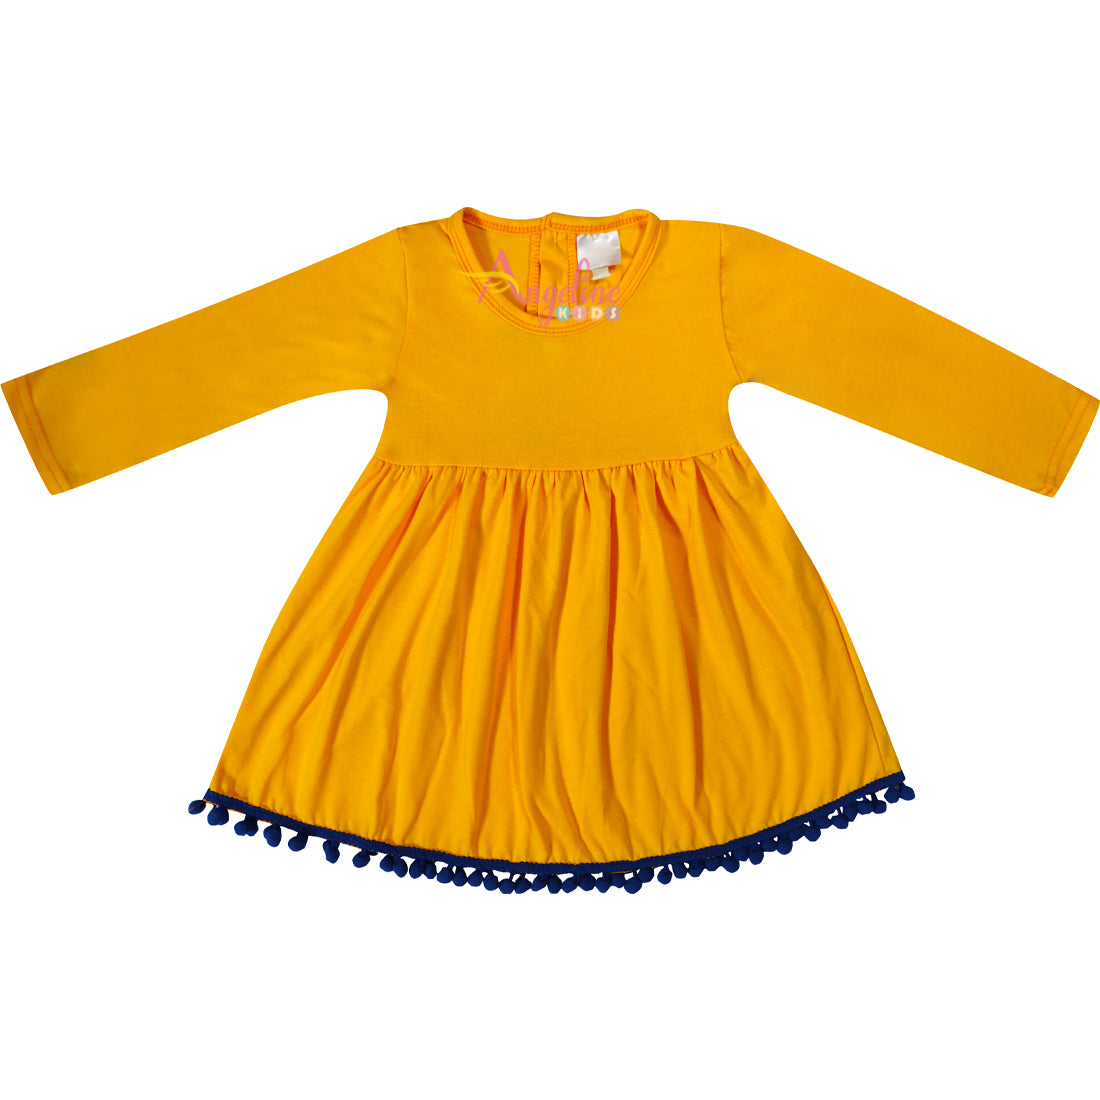 Baby Toddler Little Girls Fall Sunflower Scarf Outfit Set - Gold/Navy - Angeline Kids